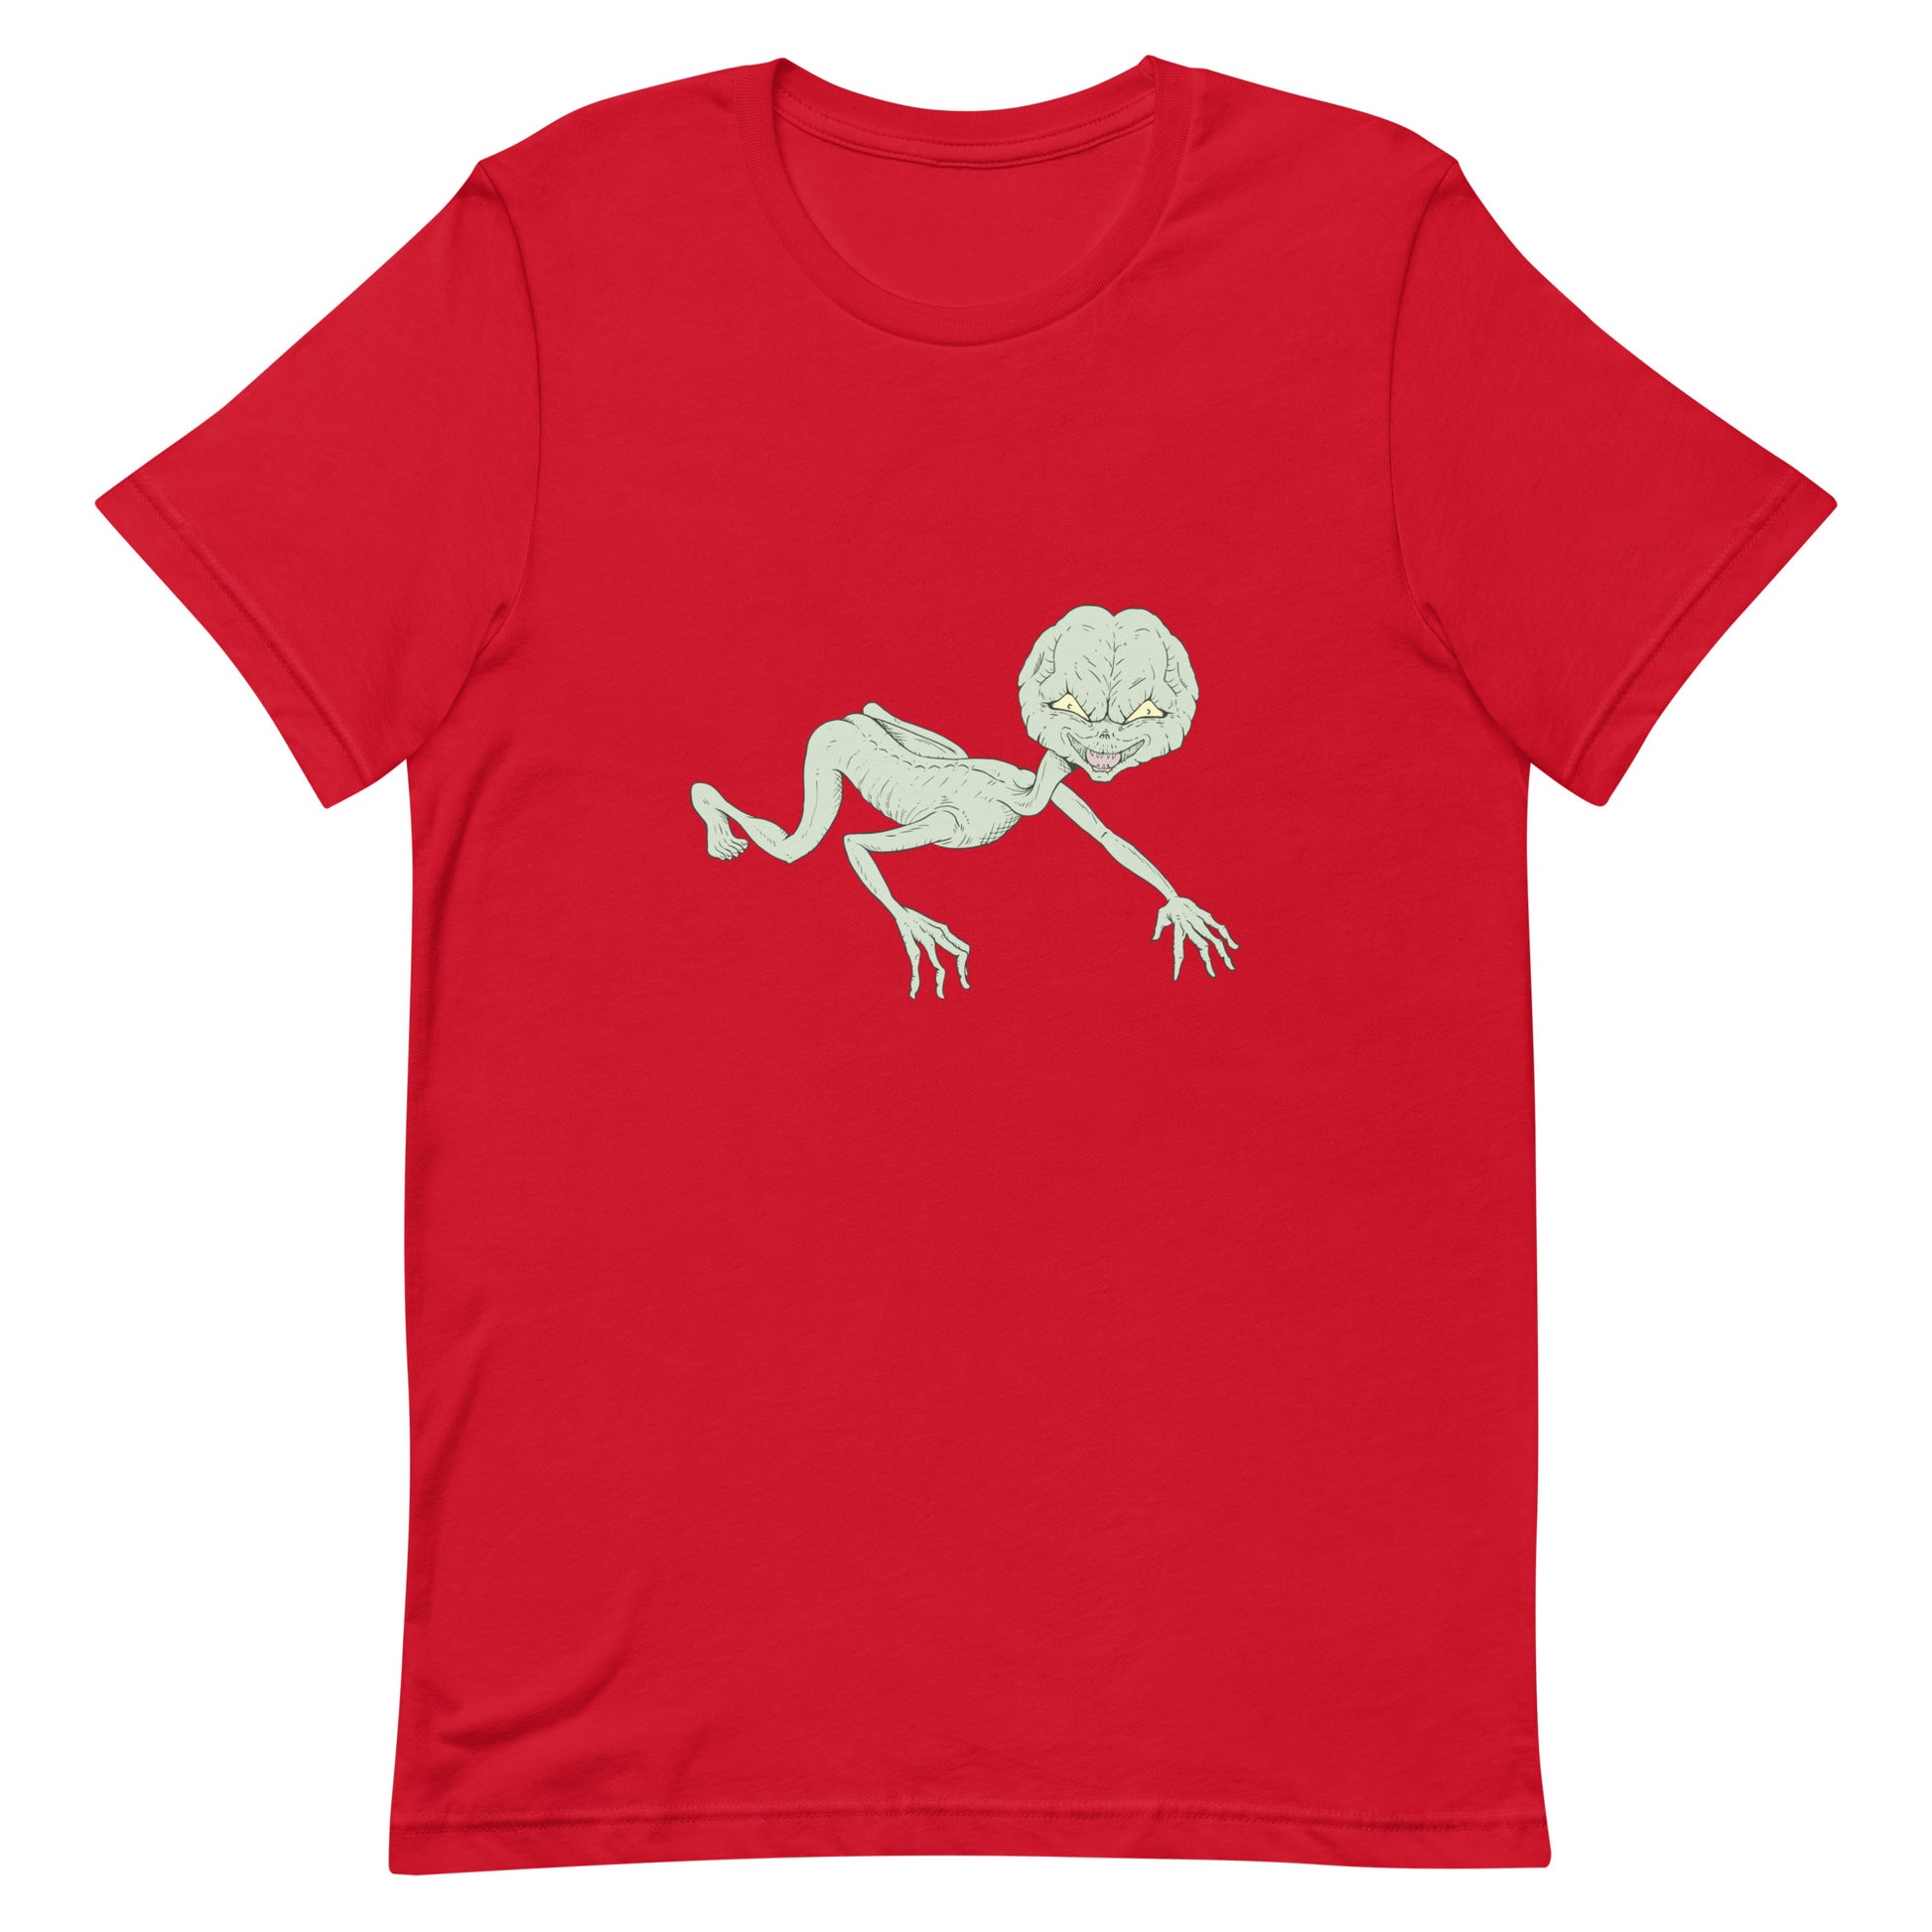 "Creepy Crawling Alien Sloth" T-Shirt - Weave Got Gifts - Unique Gifts You Won’t Find Anywhere Else!